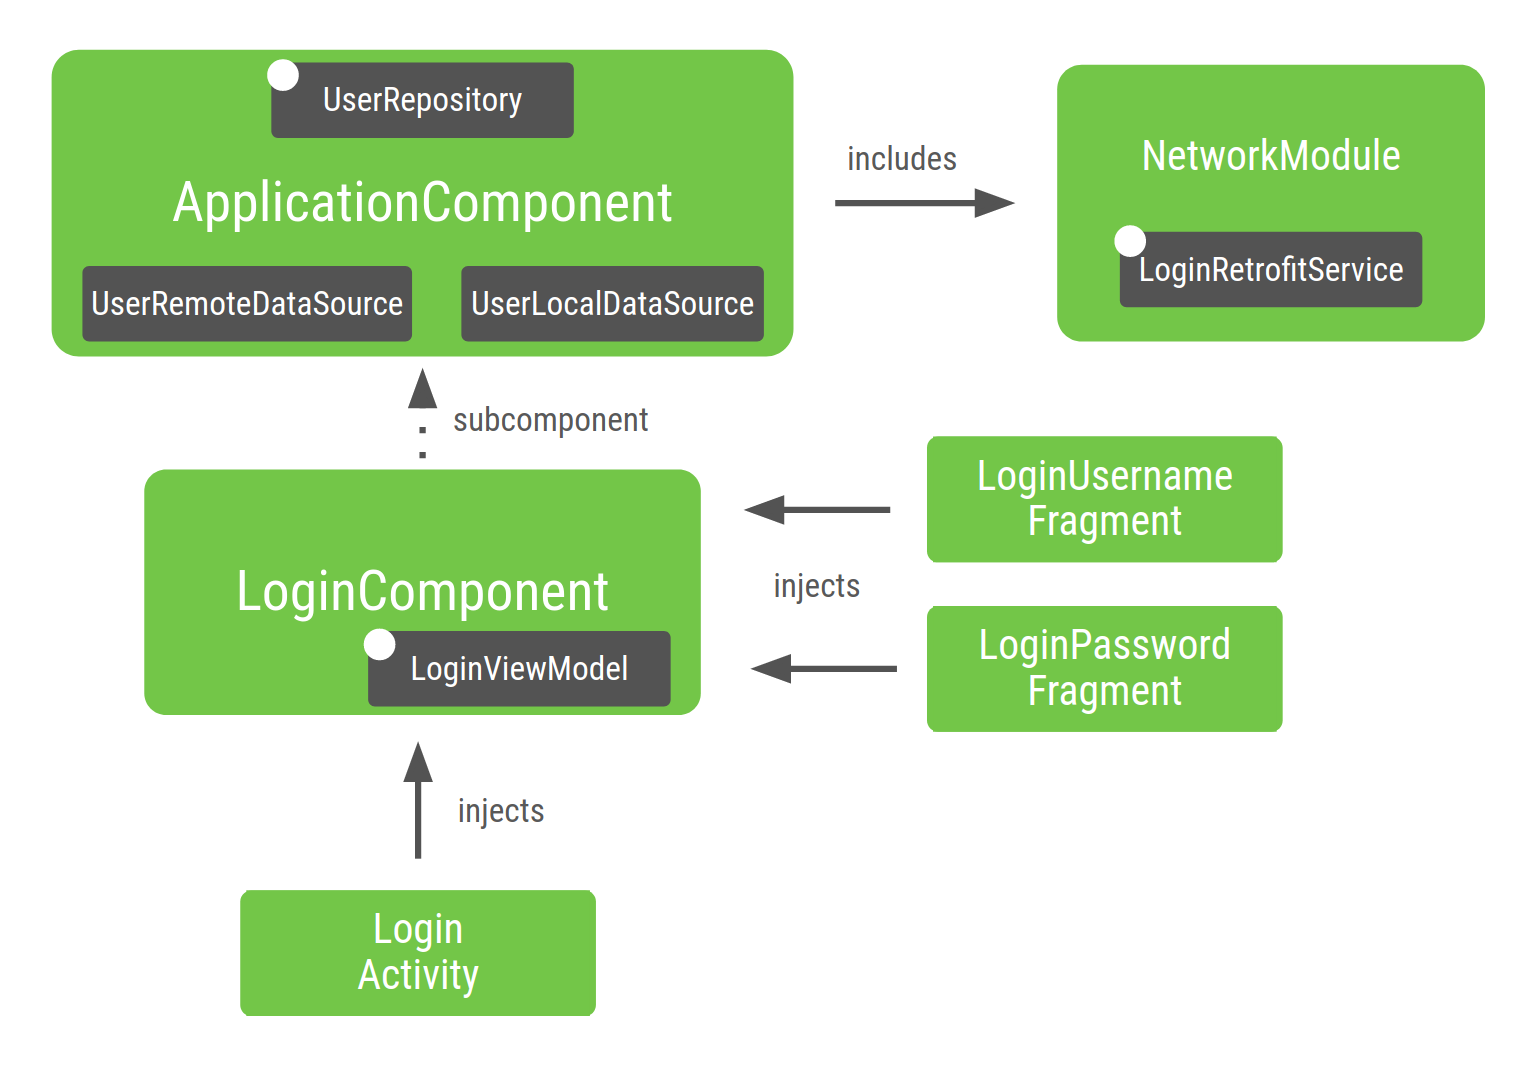 Application graph after adding the last subcomponent